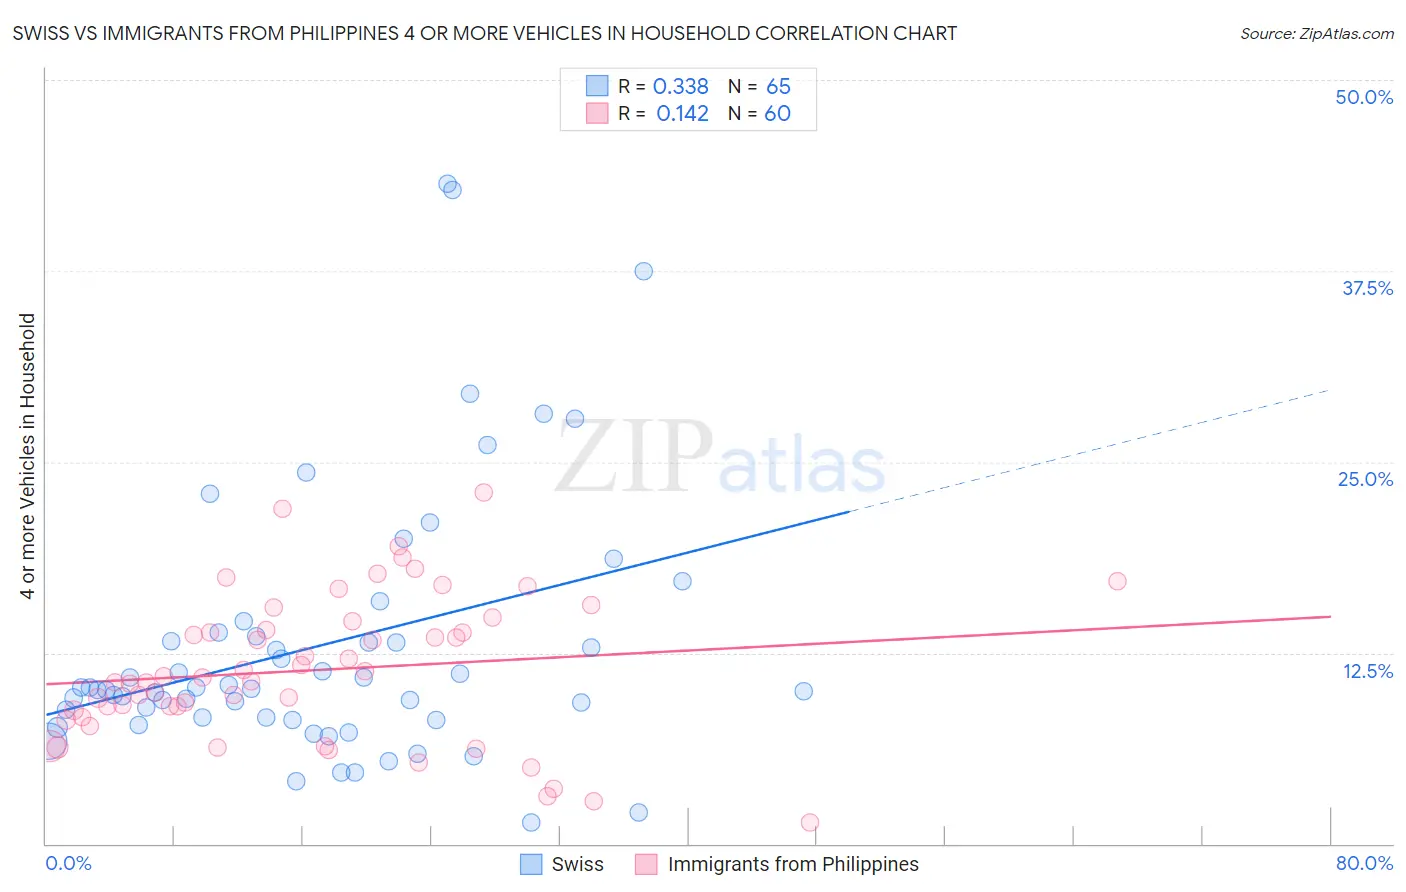 Swiss vs Immigrants from Philippines 4 or more Vehicles in Household